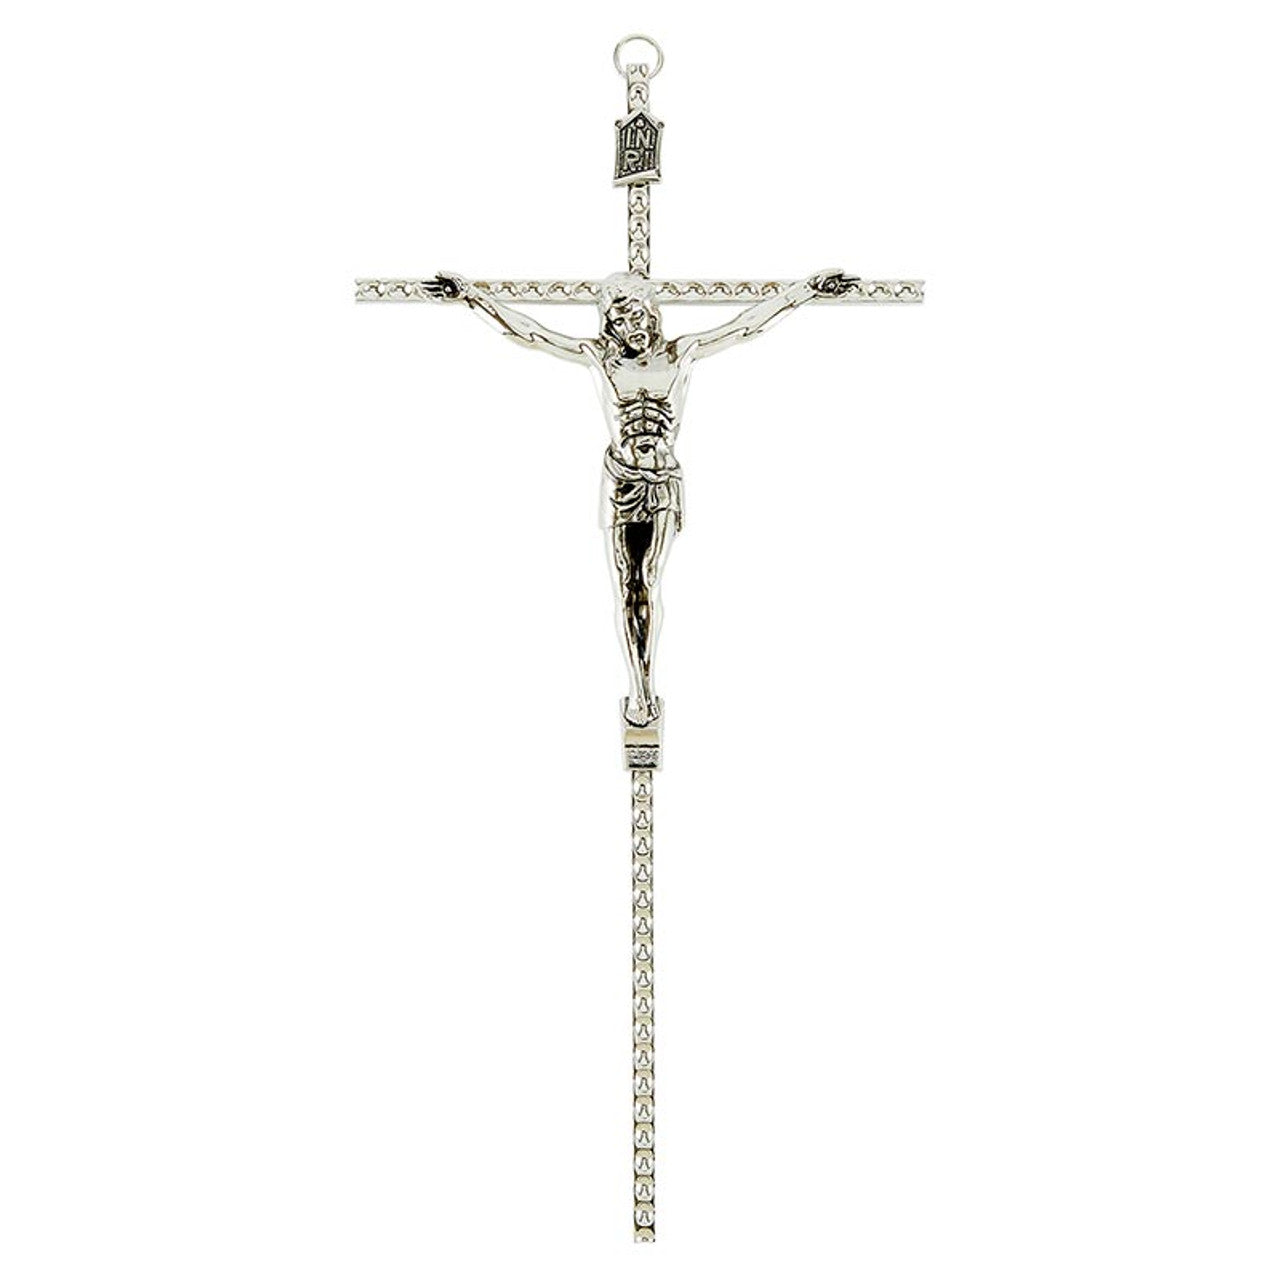 10" Silver Hammered Wall Crucifix